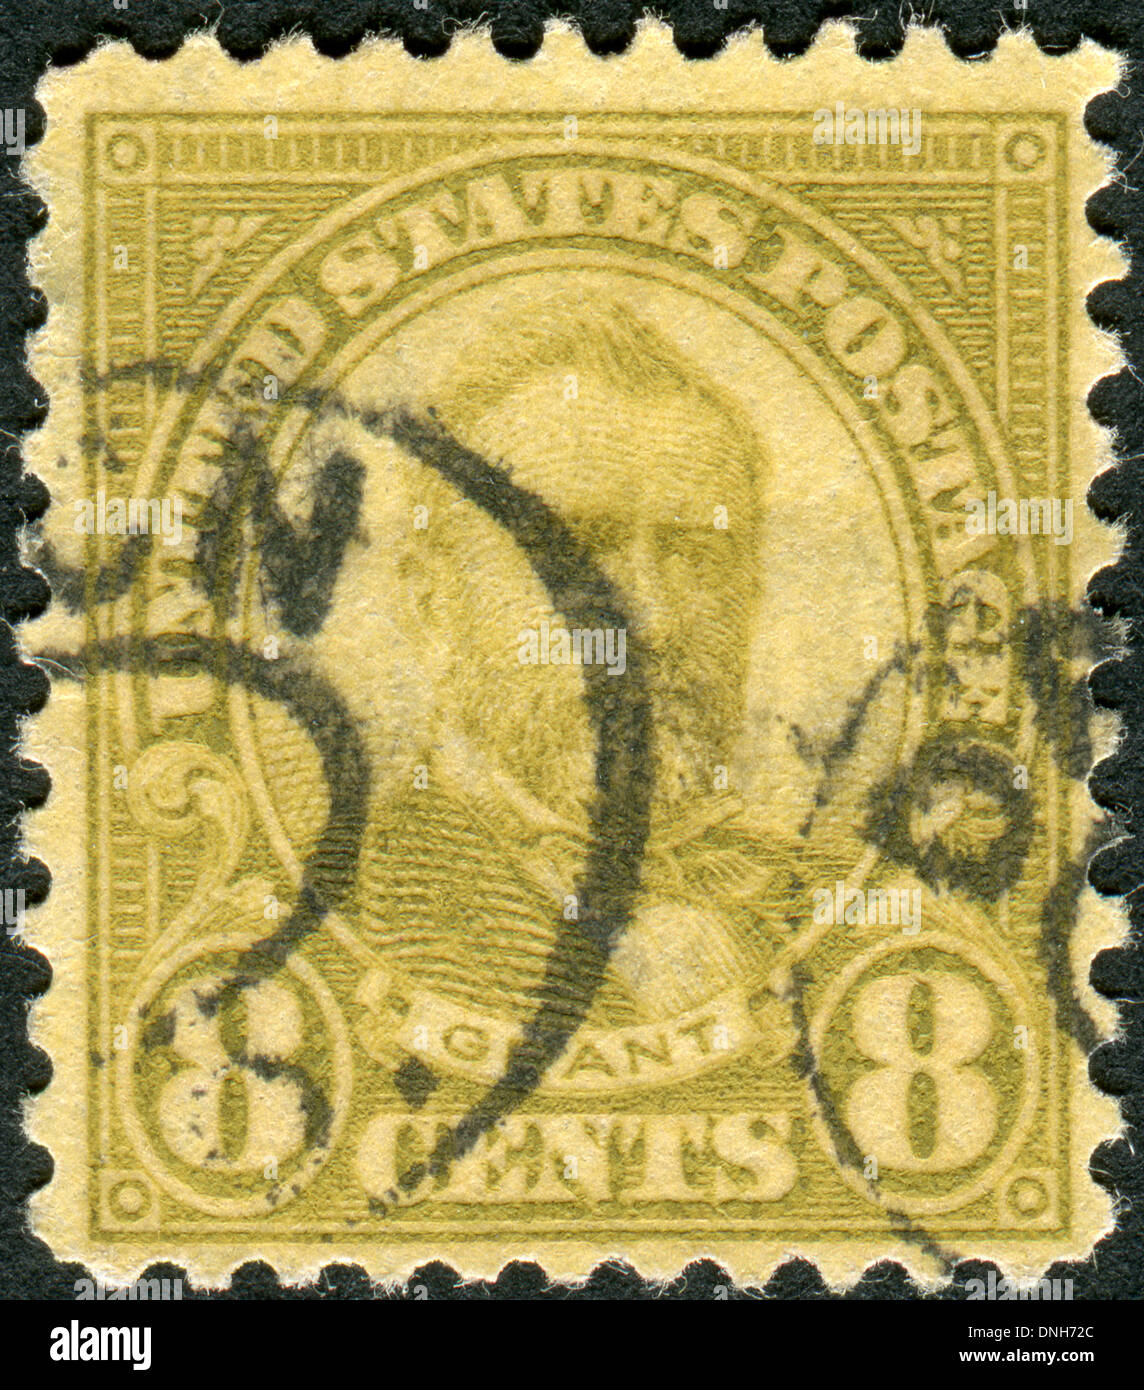 Postage stamp printed in the USA, a portrait of 18th President of the United States, Ulysses S. Grant Stock Photo